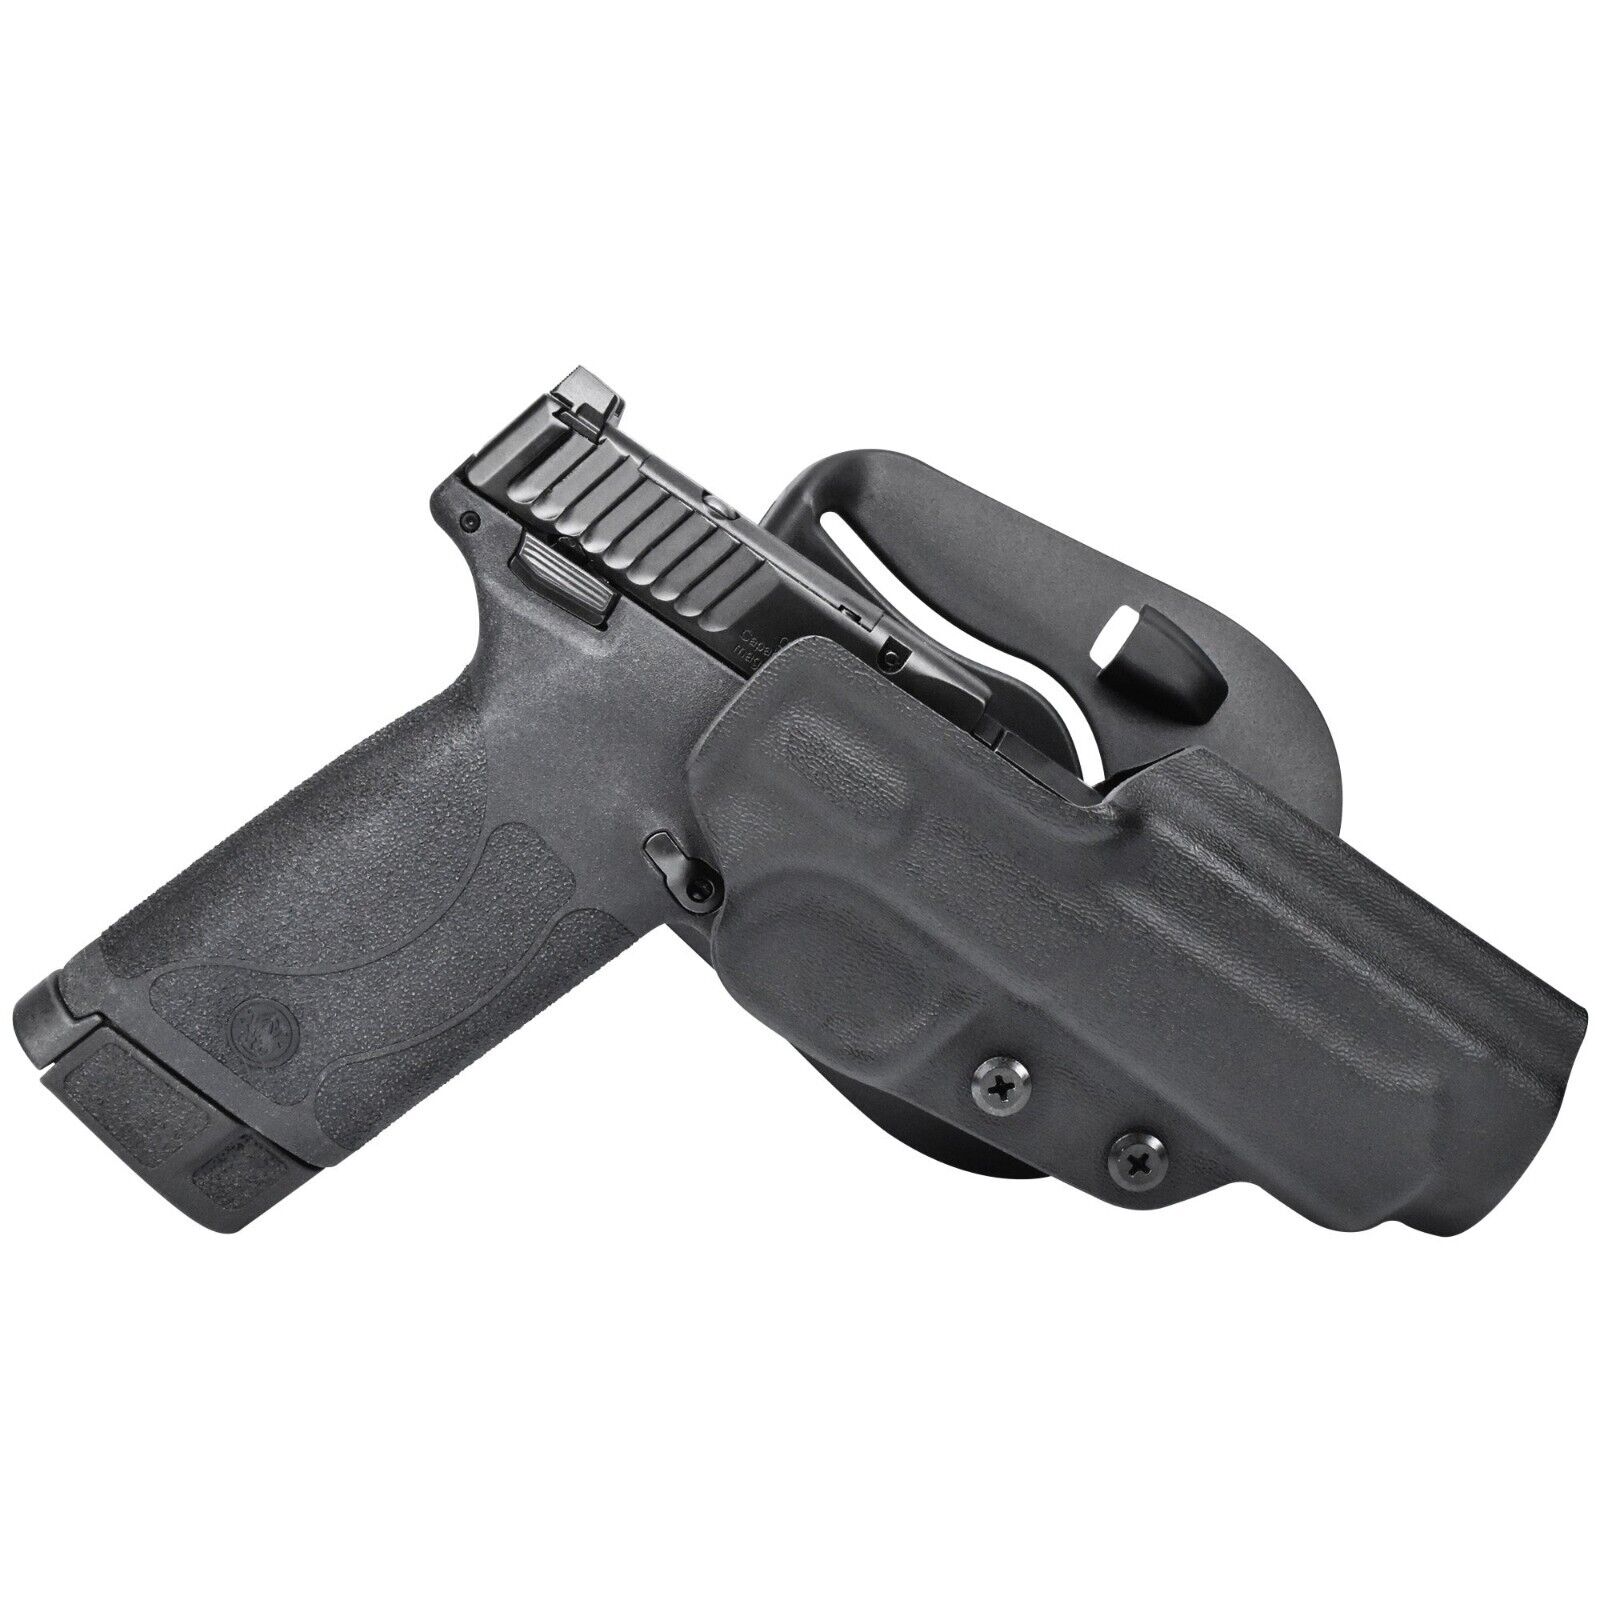 OWB Paddle Holster Fits Smith & Wesson M&P 22 Magnum